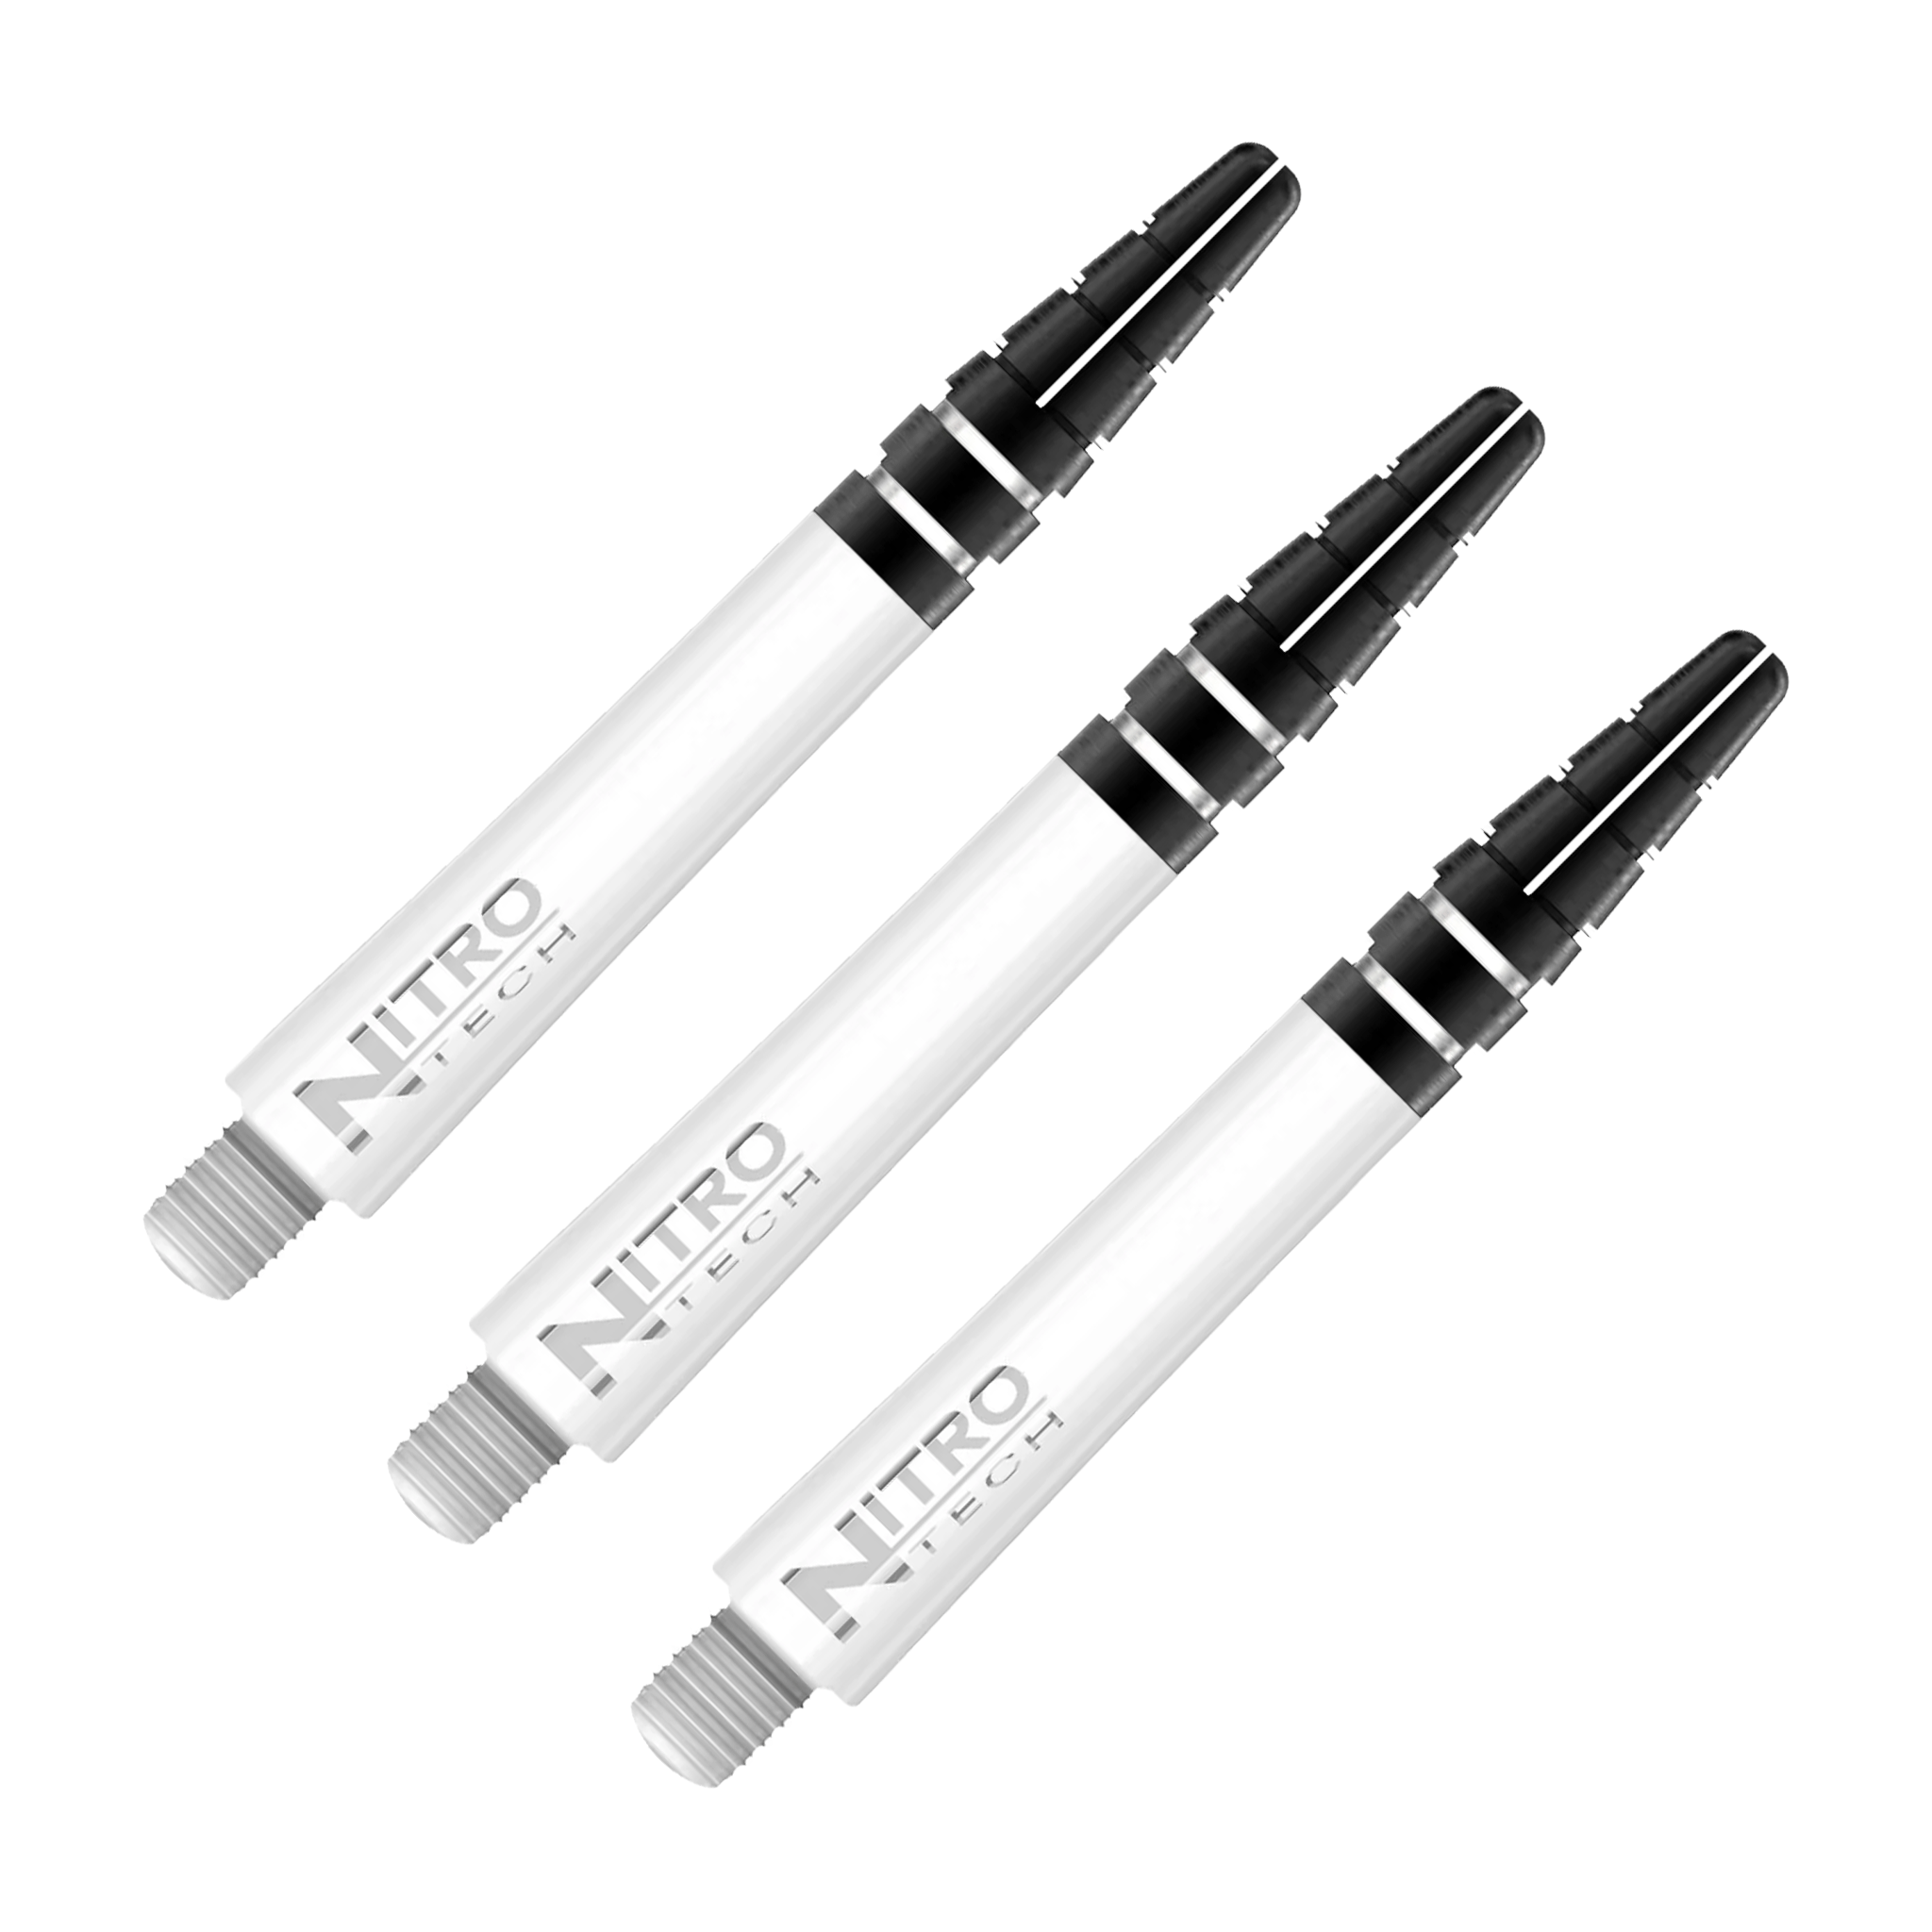 Red Dragon Nitrotech - Polycarbonate Dart Shafts Intermediate (39mm) / Solid White Shafts